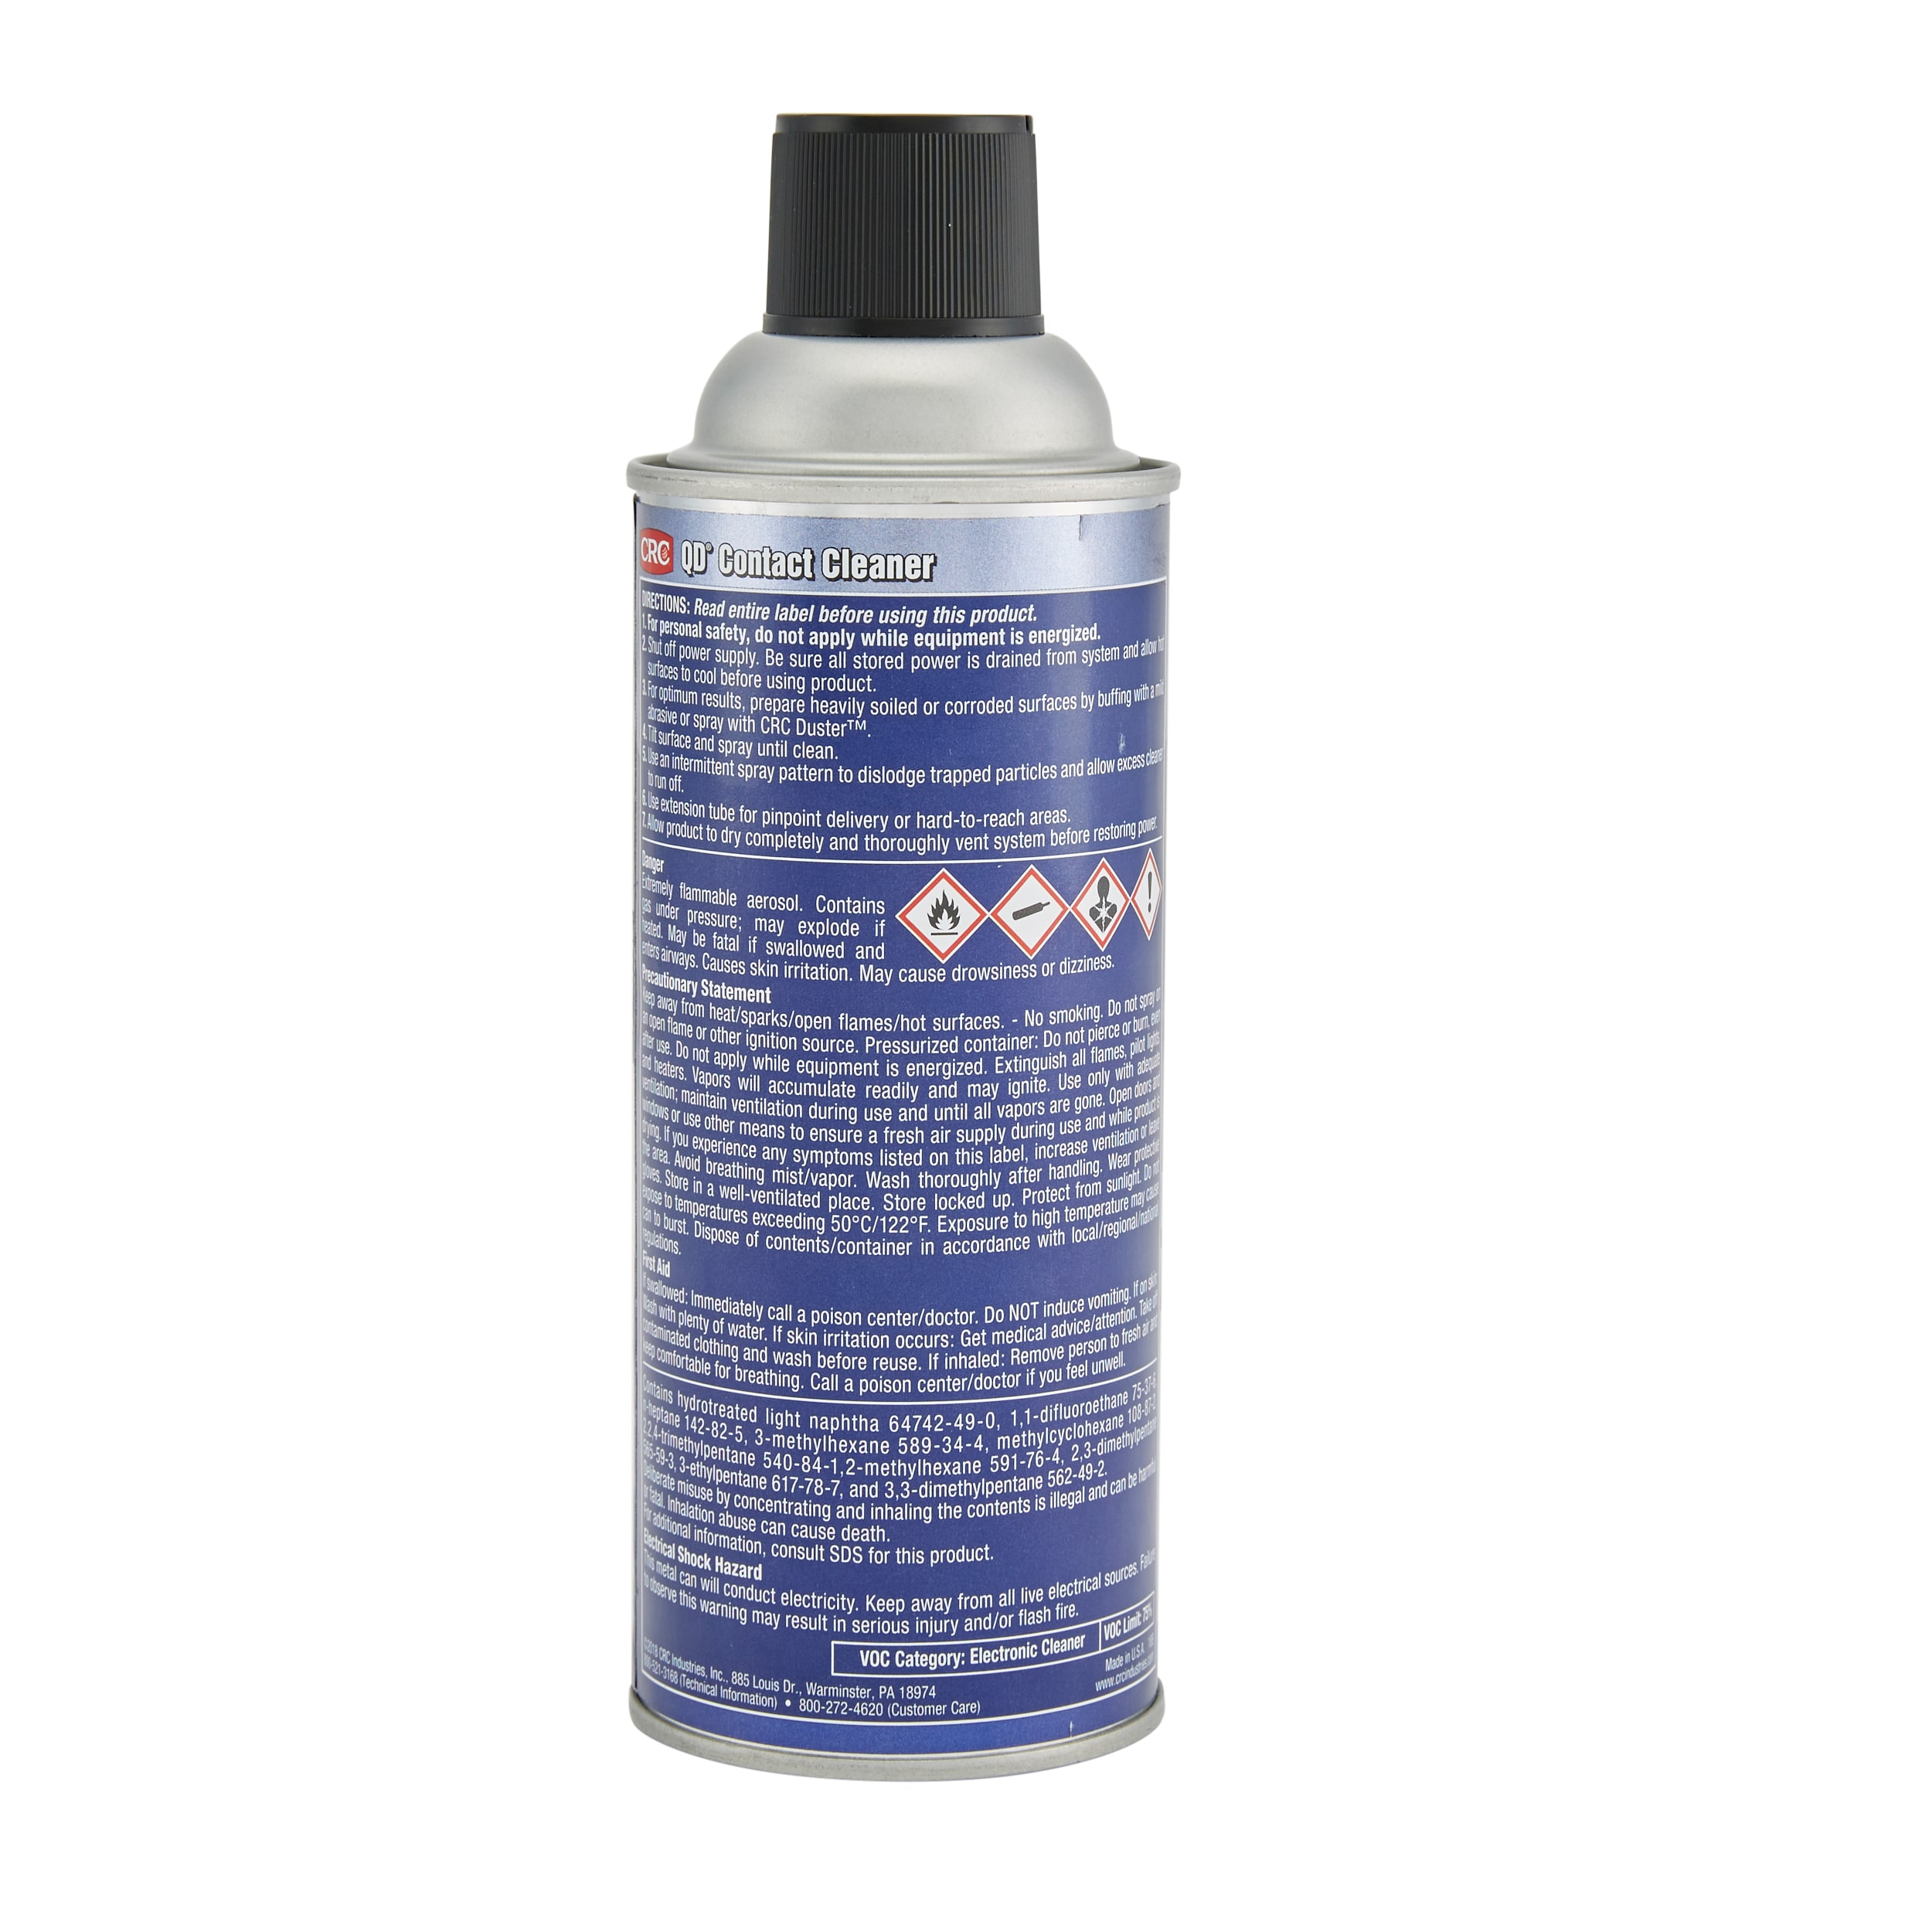 CRC QD Contact Cleaner 11 oz. - Fast Evaporating, Residue-Free, Safe for  Electronics - NSF K2 Registered in the Electronic Cleaners department at